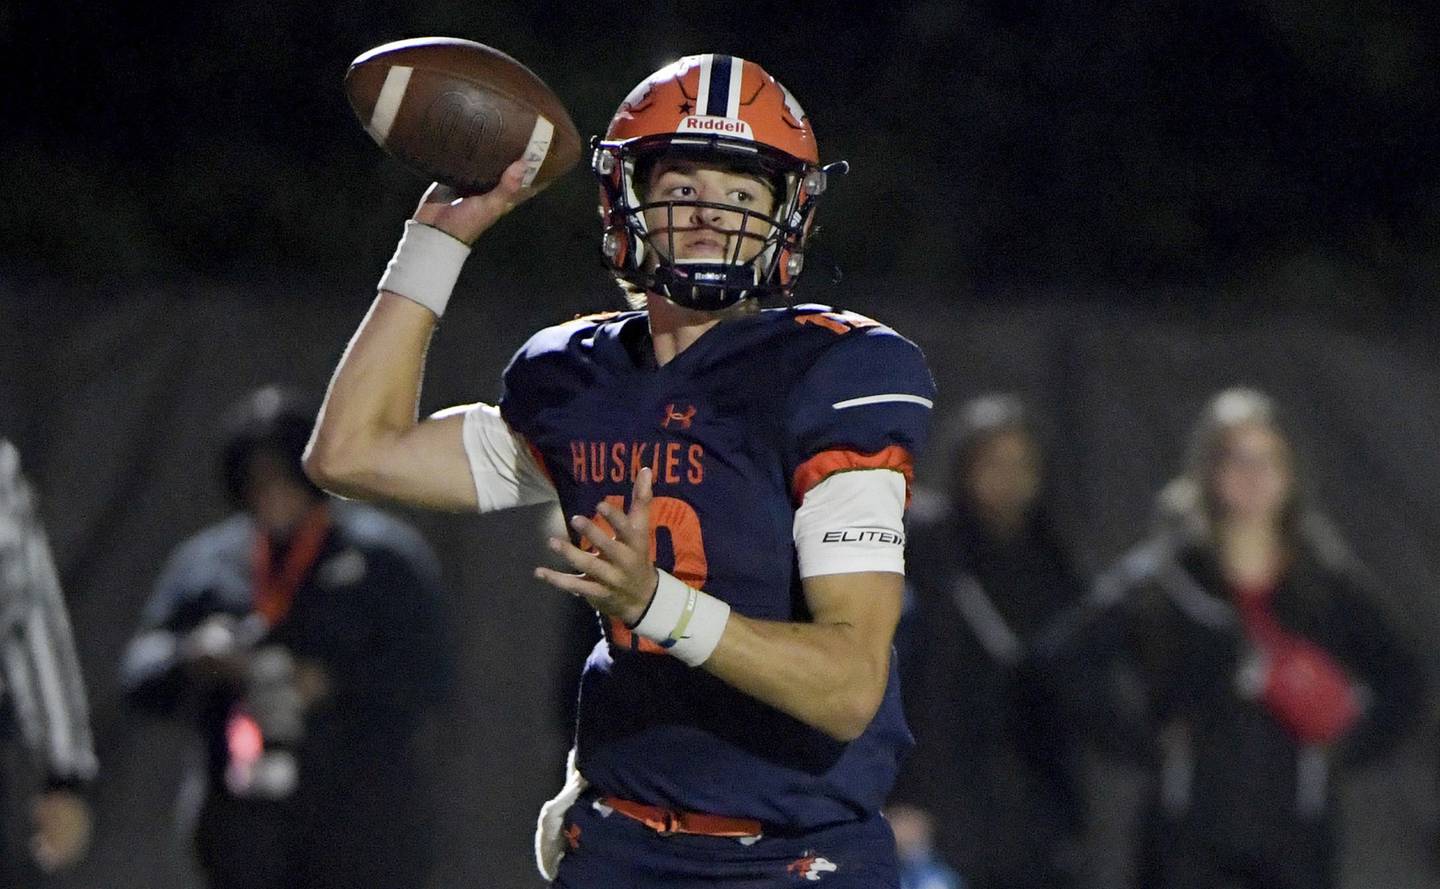 Naperville North quarterback Aidan Gray, who signed with Northwestern, looks for an open receiver during a game against Naperville Central on Sept. 30, 2022.